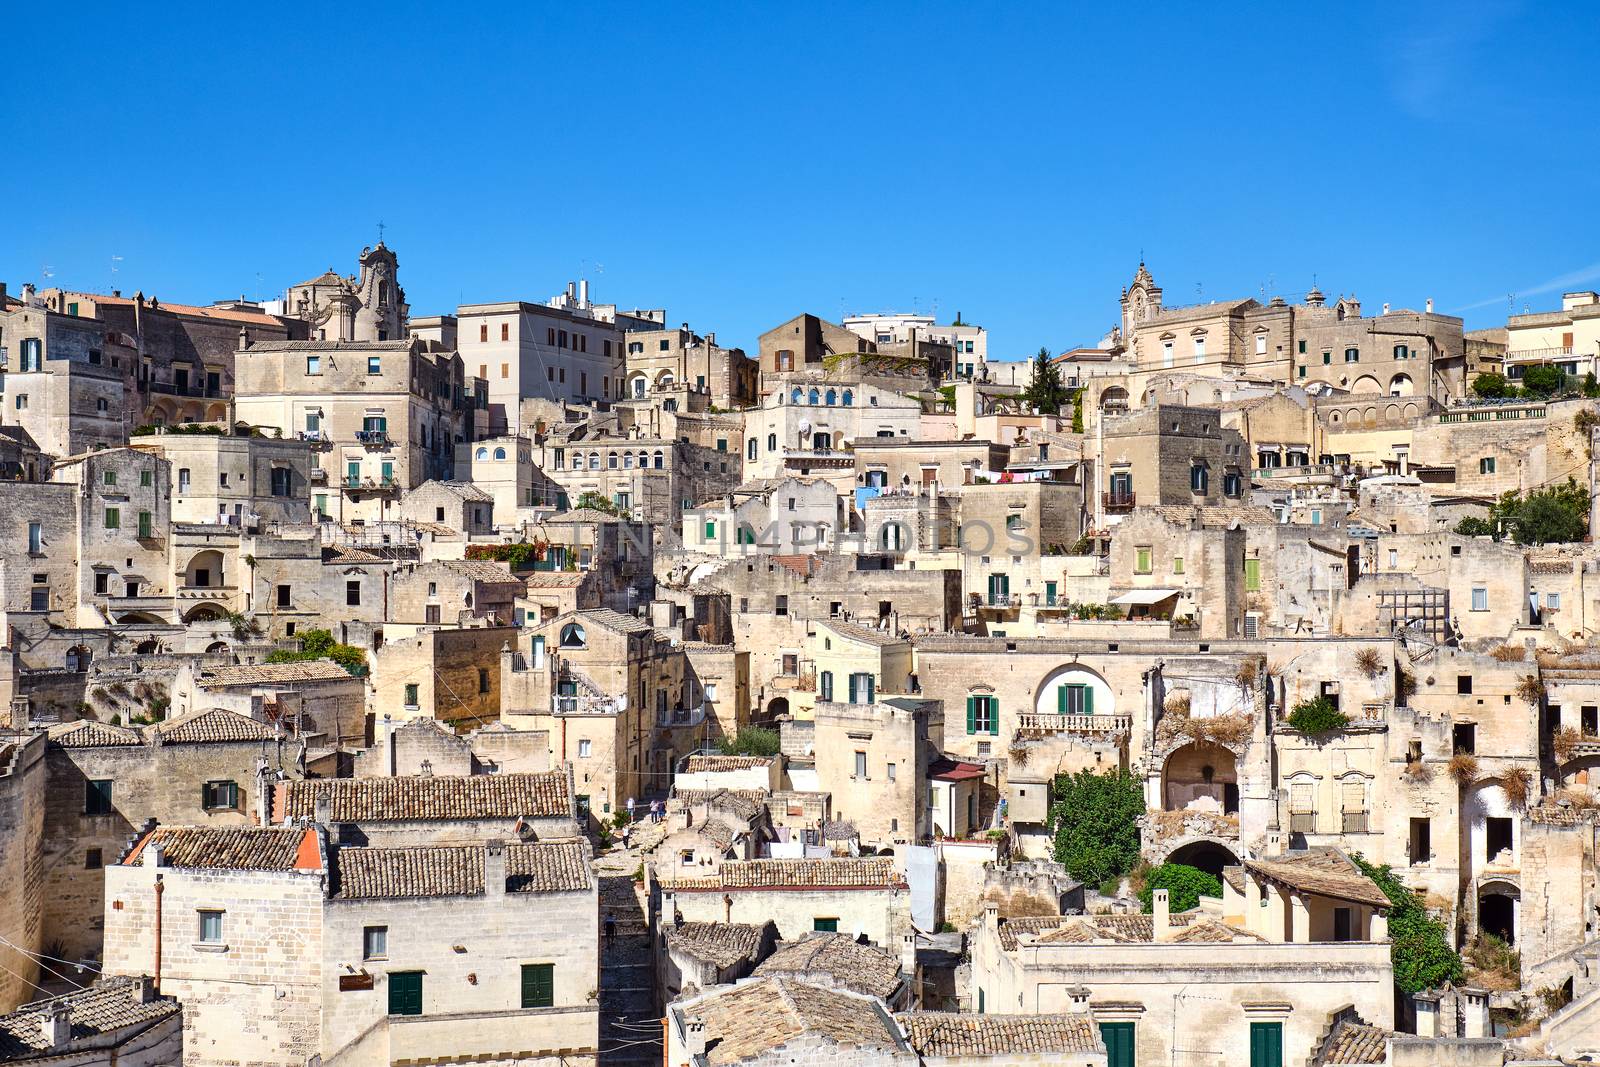 The old houses of Matera in southern Italy by elxeneize